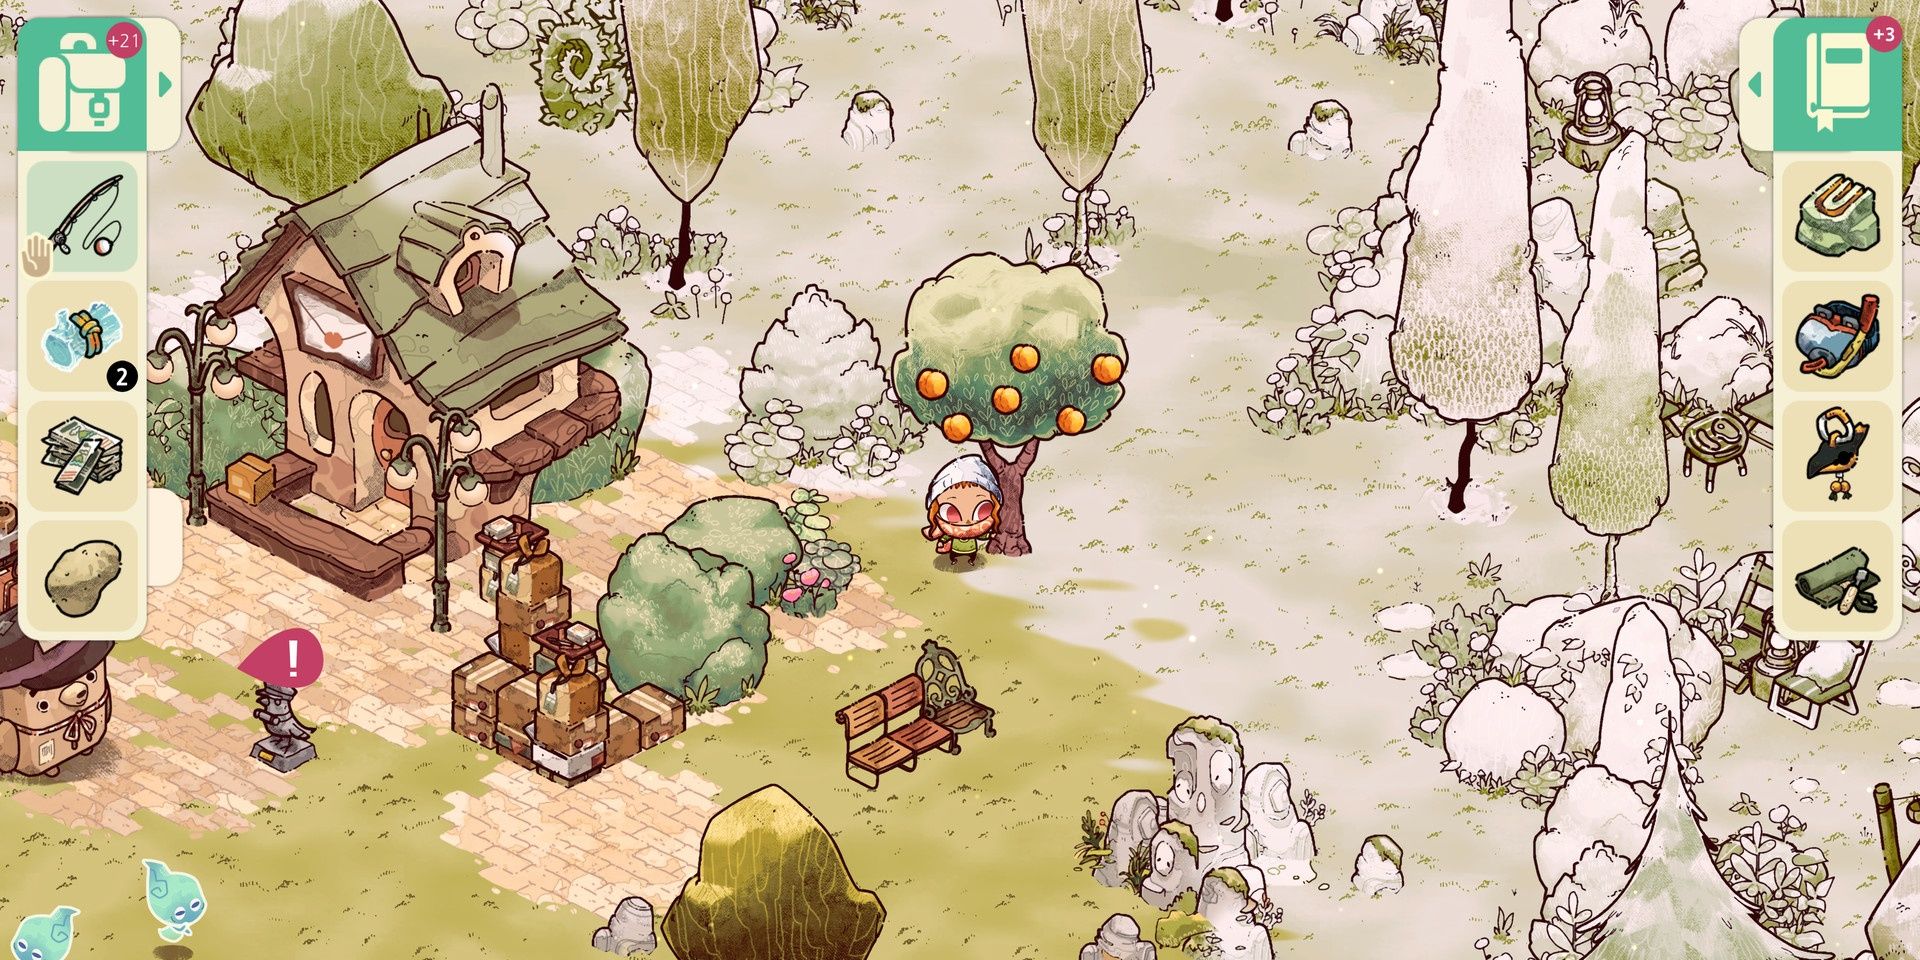 A spirit scout standing near an orange tree during the winter of Cozy Grove